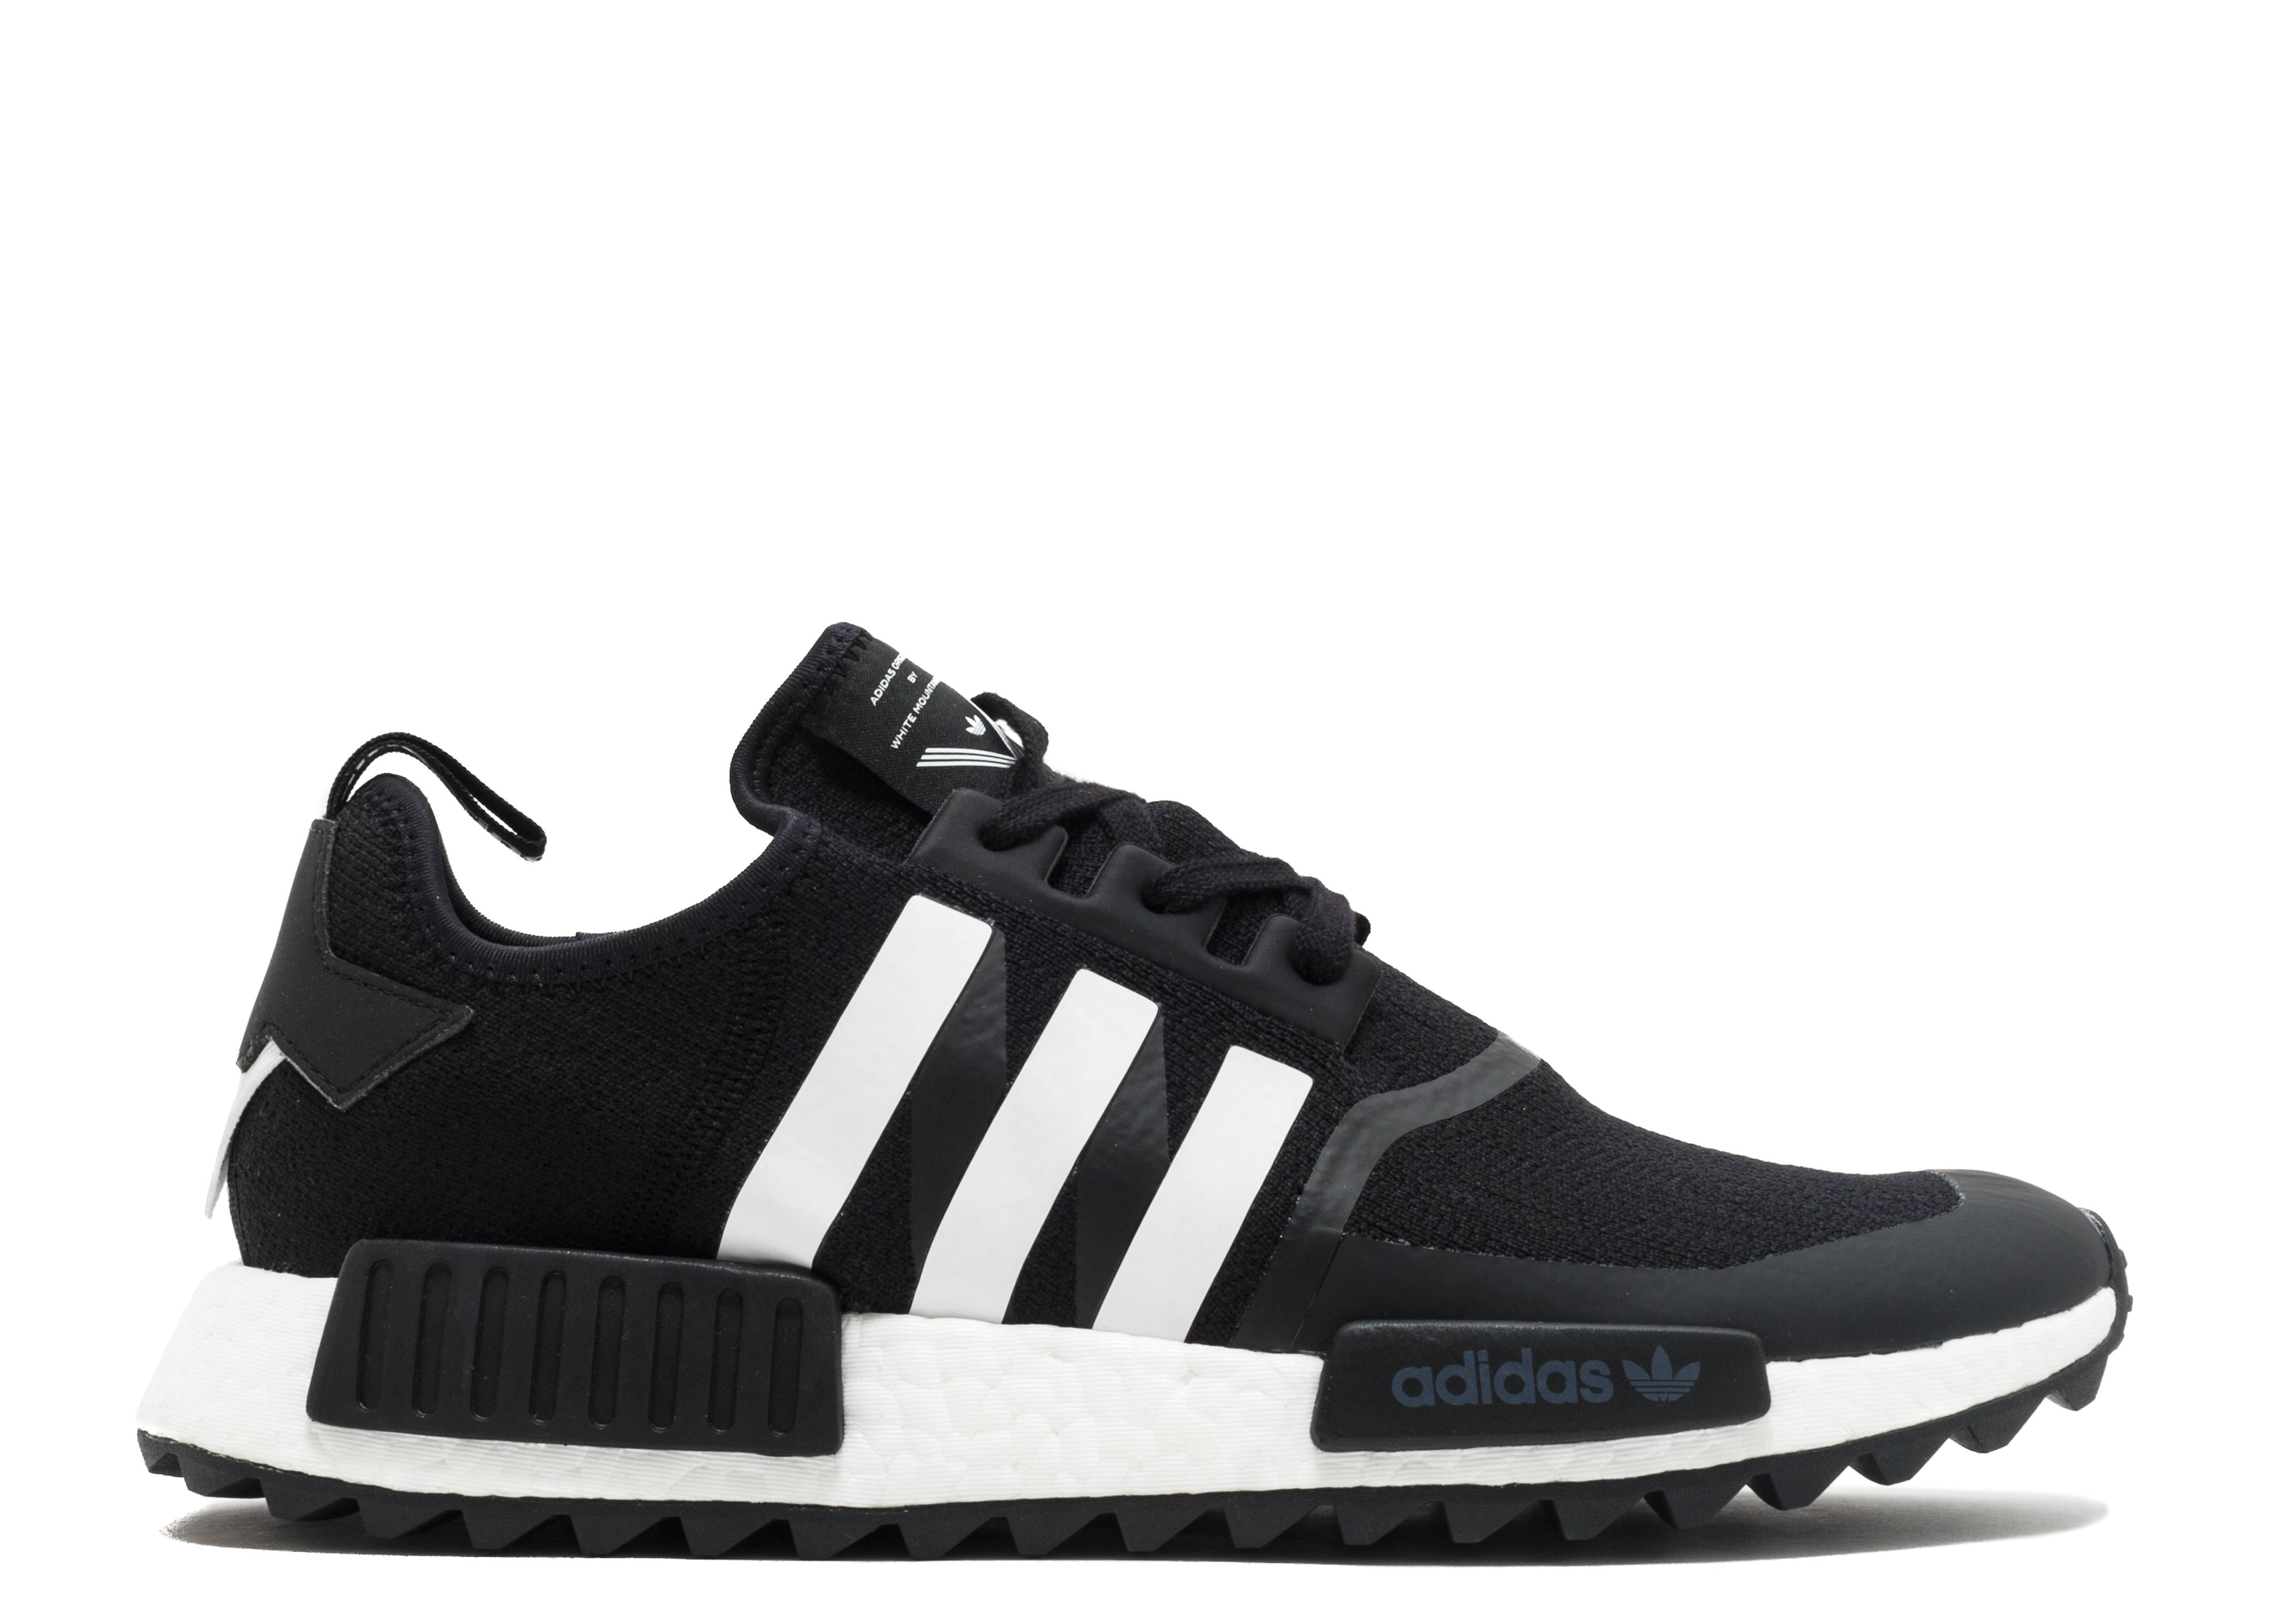 White Mountaineering x NMD Trail 'Core Black'